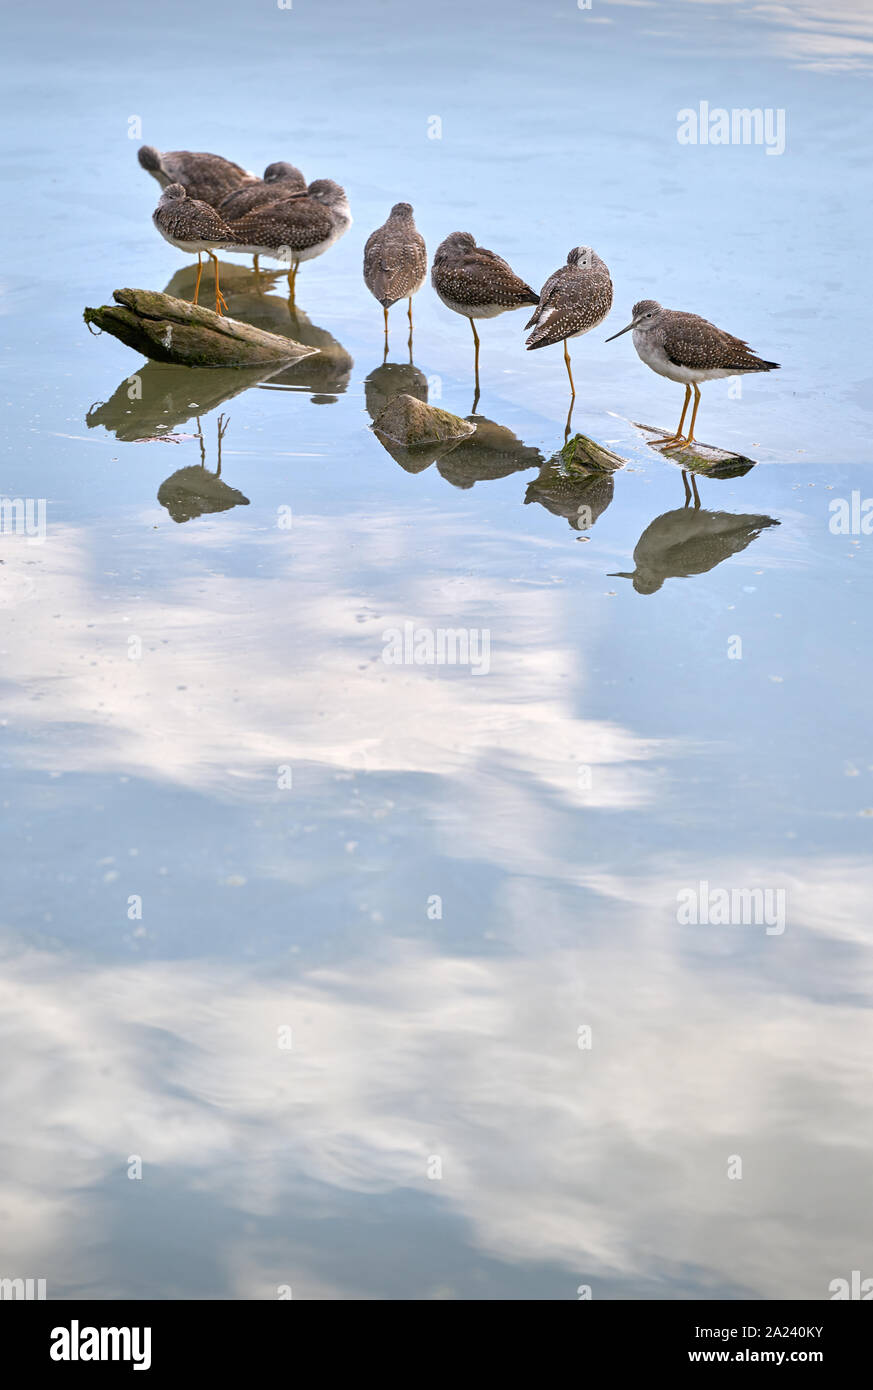 Lesser Yellowlegs on the River. Lesser Yellowleg Sandpipers rest on a floating log. Stock Photo